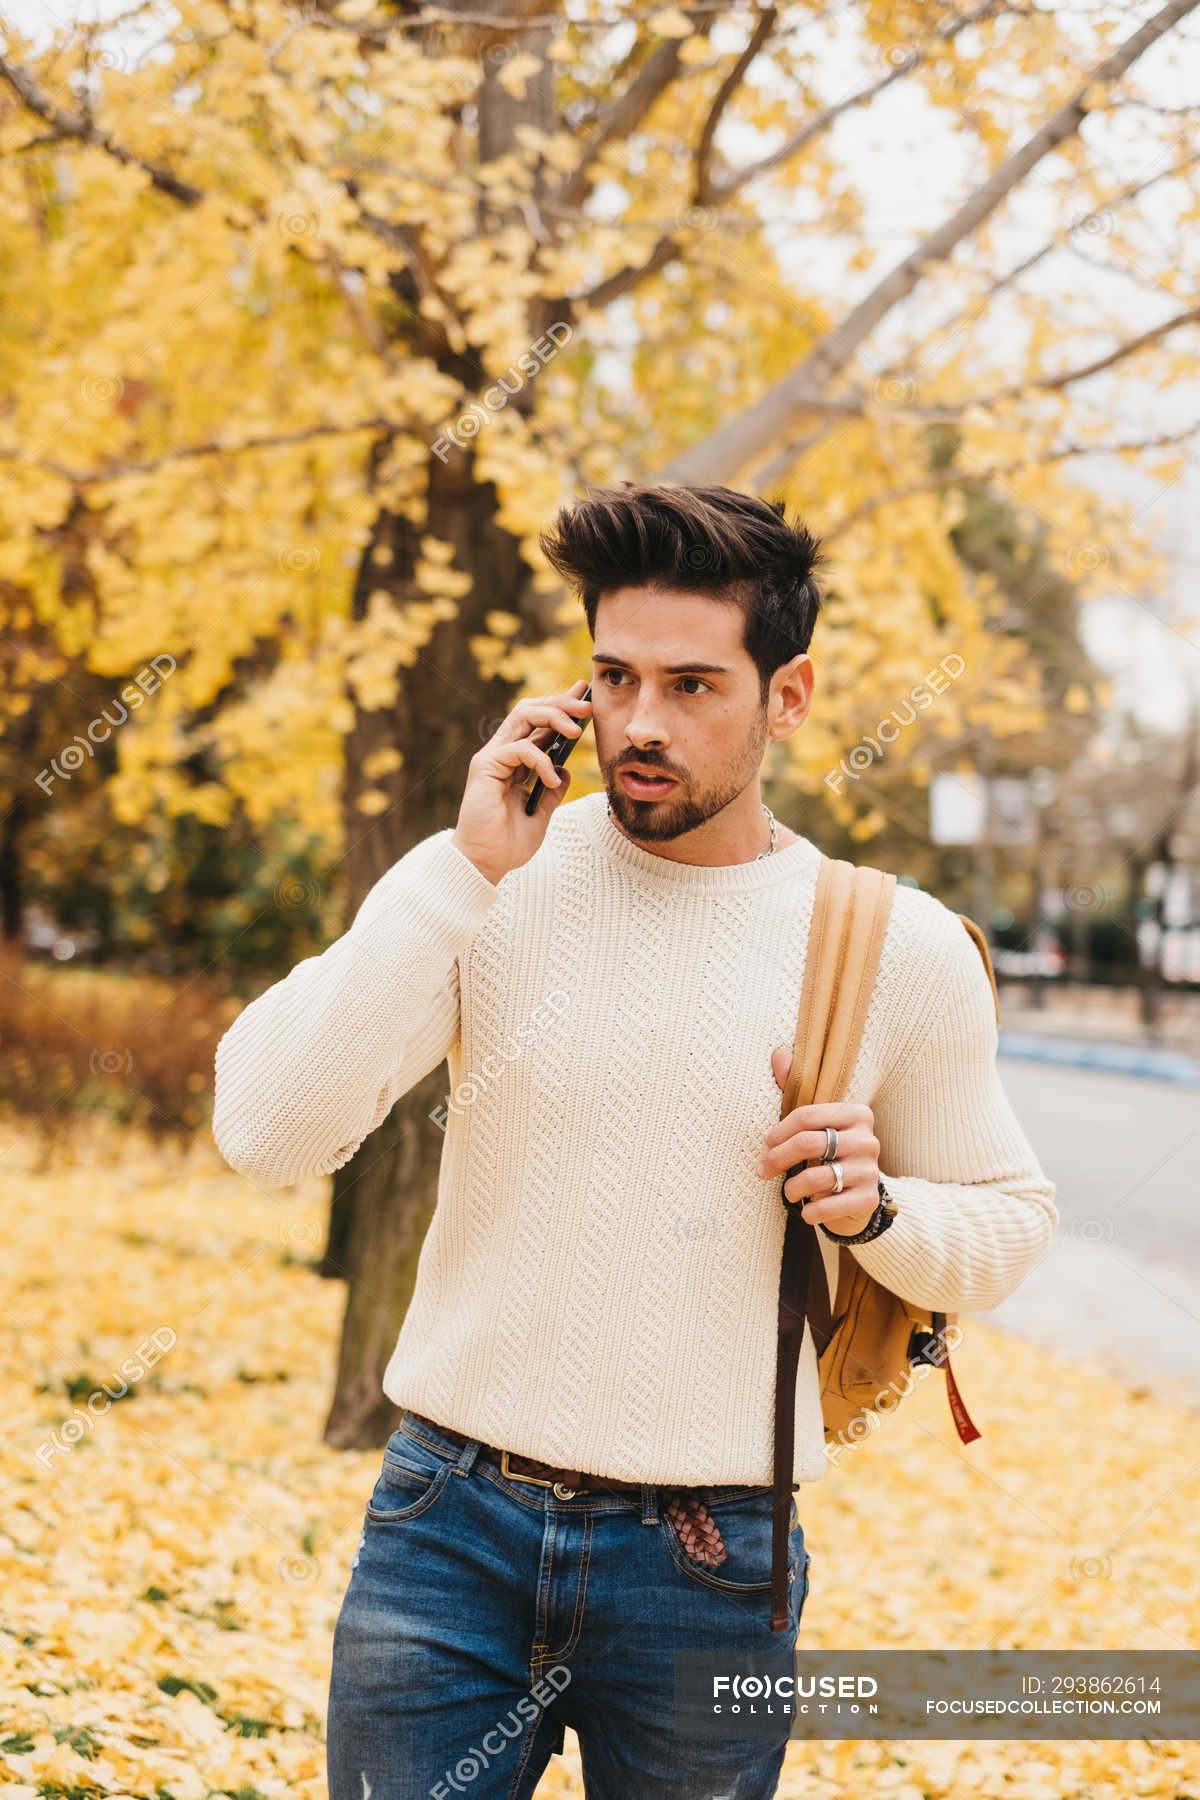 Handsome young man with trendy hairstyle walking on autumn leaves and  speaking on smartphone on daytime — communication, sweater - Stock Photo |  #293862614